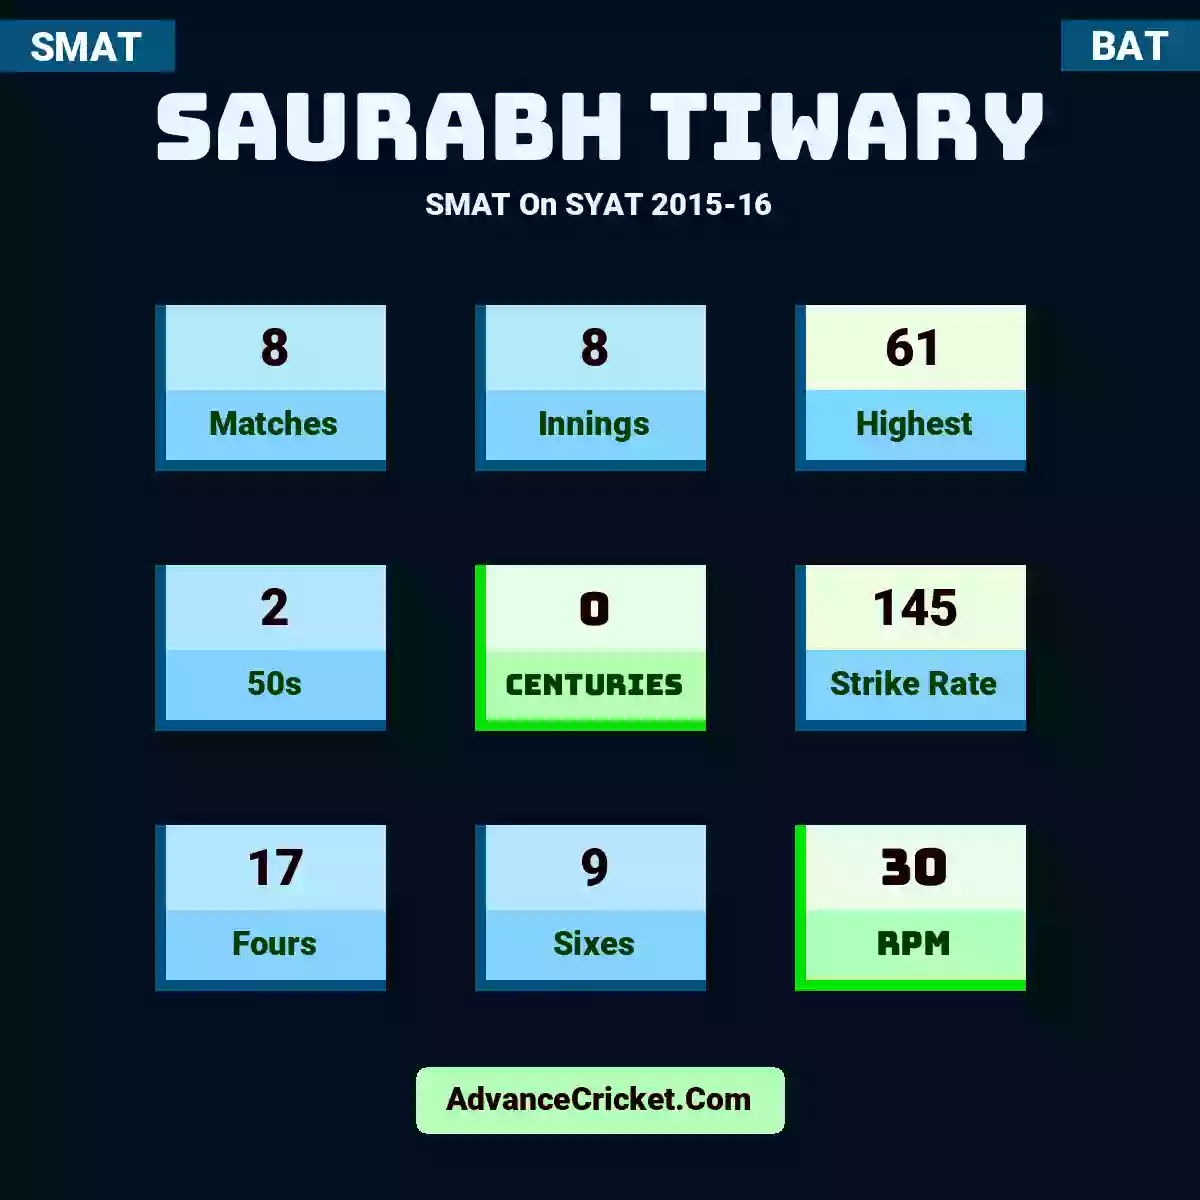 Saurabh Tiwary SMAT  On SYAT 2015-16, Saurabh Tiwary played 8 matches, scored 61 runs as highest, 2 half-centuries, and 0 centuries, with a strike rate of 145. S.Tiwary hit 17 fours and 9 sixes, with an RPM of 30.